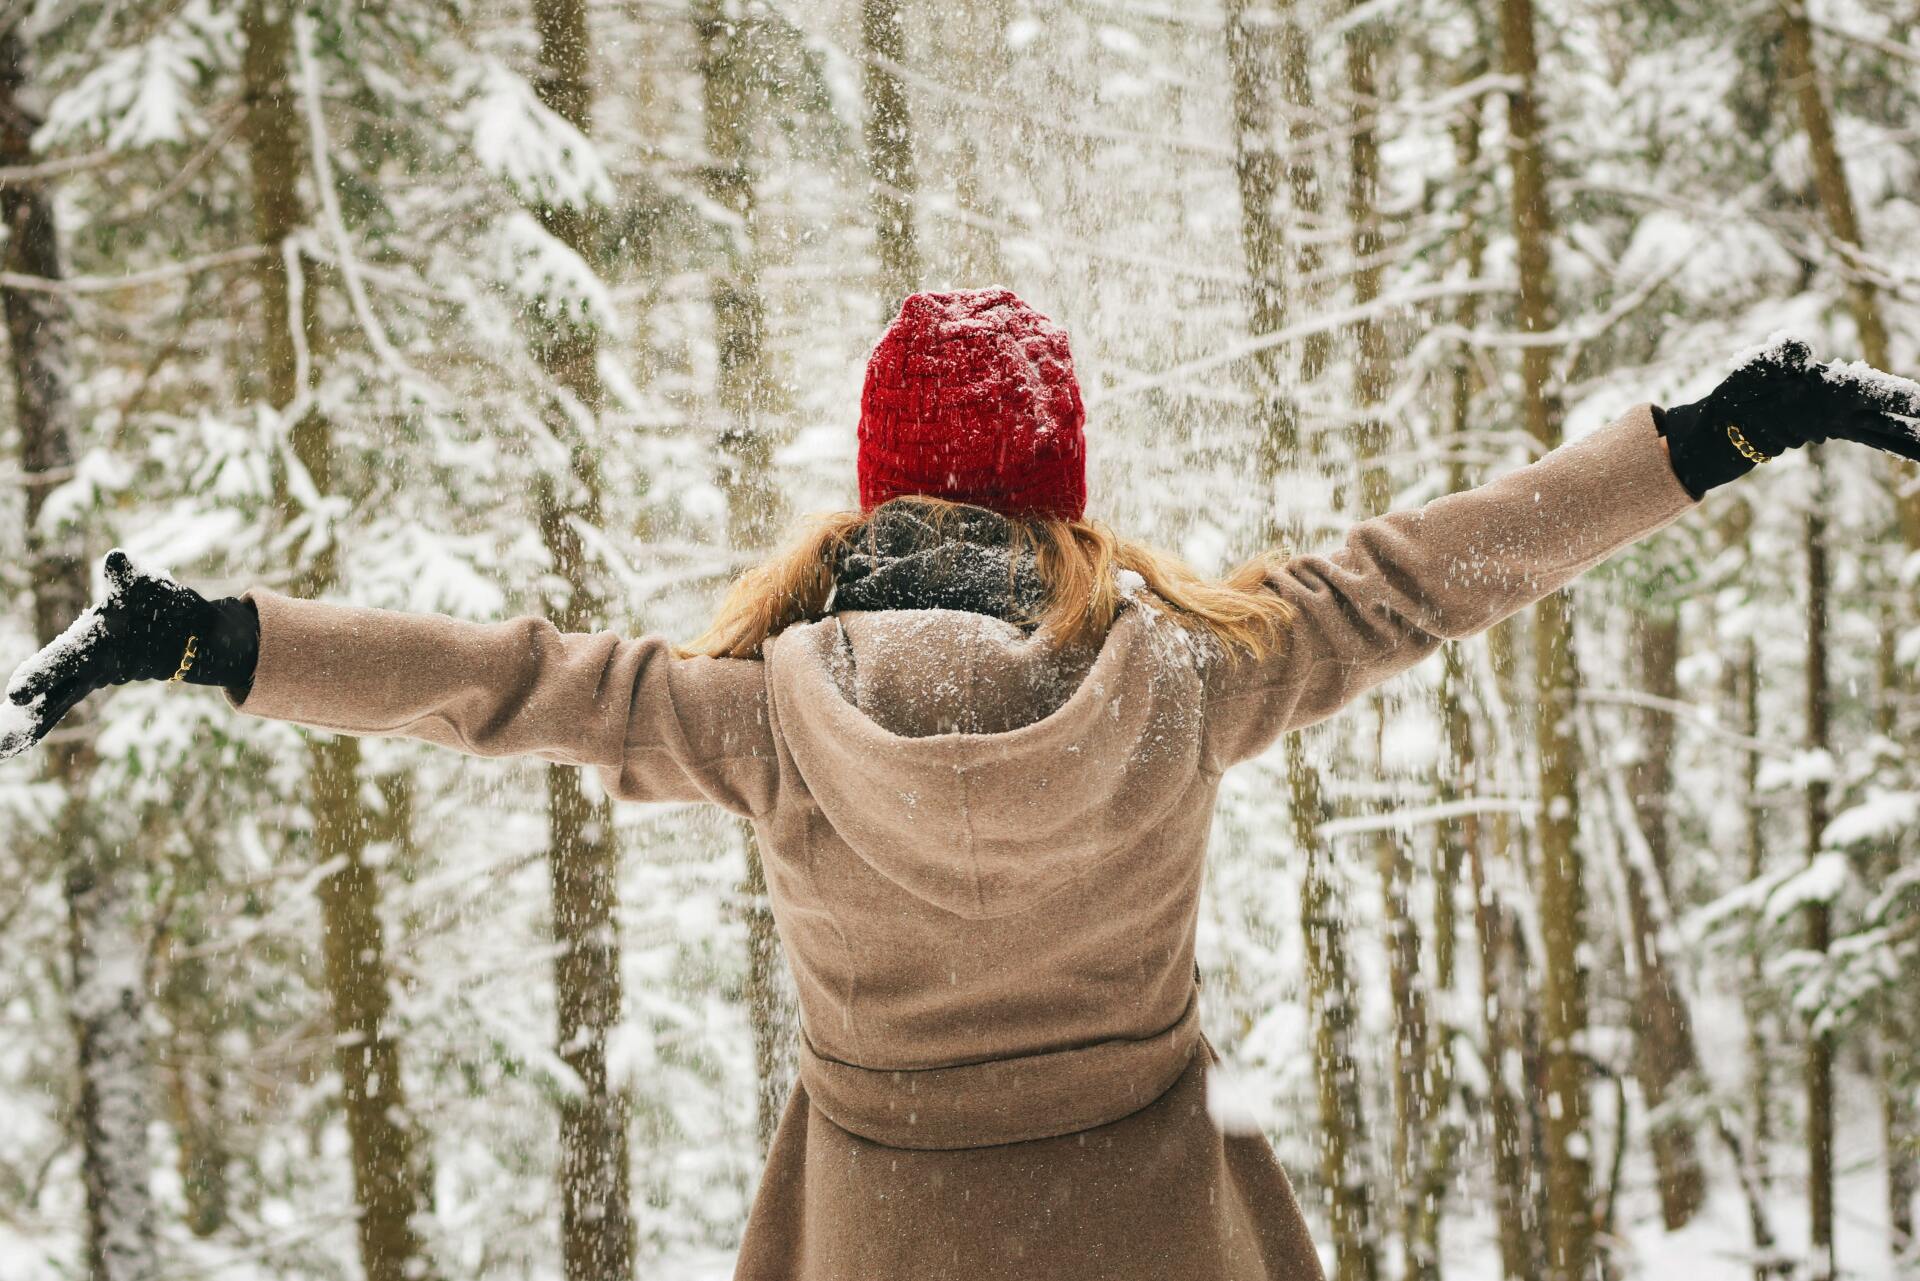 Reduce stress in go outside this holiday, reconnect. 12 ways to keep your holidays happy.